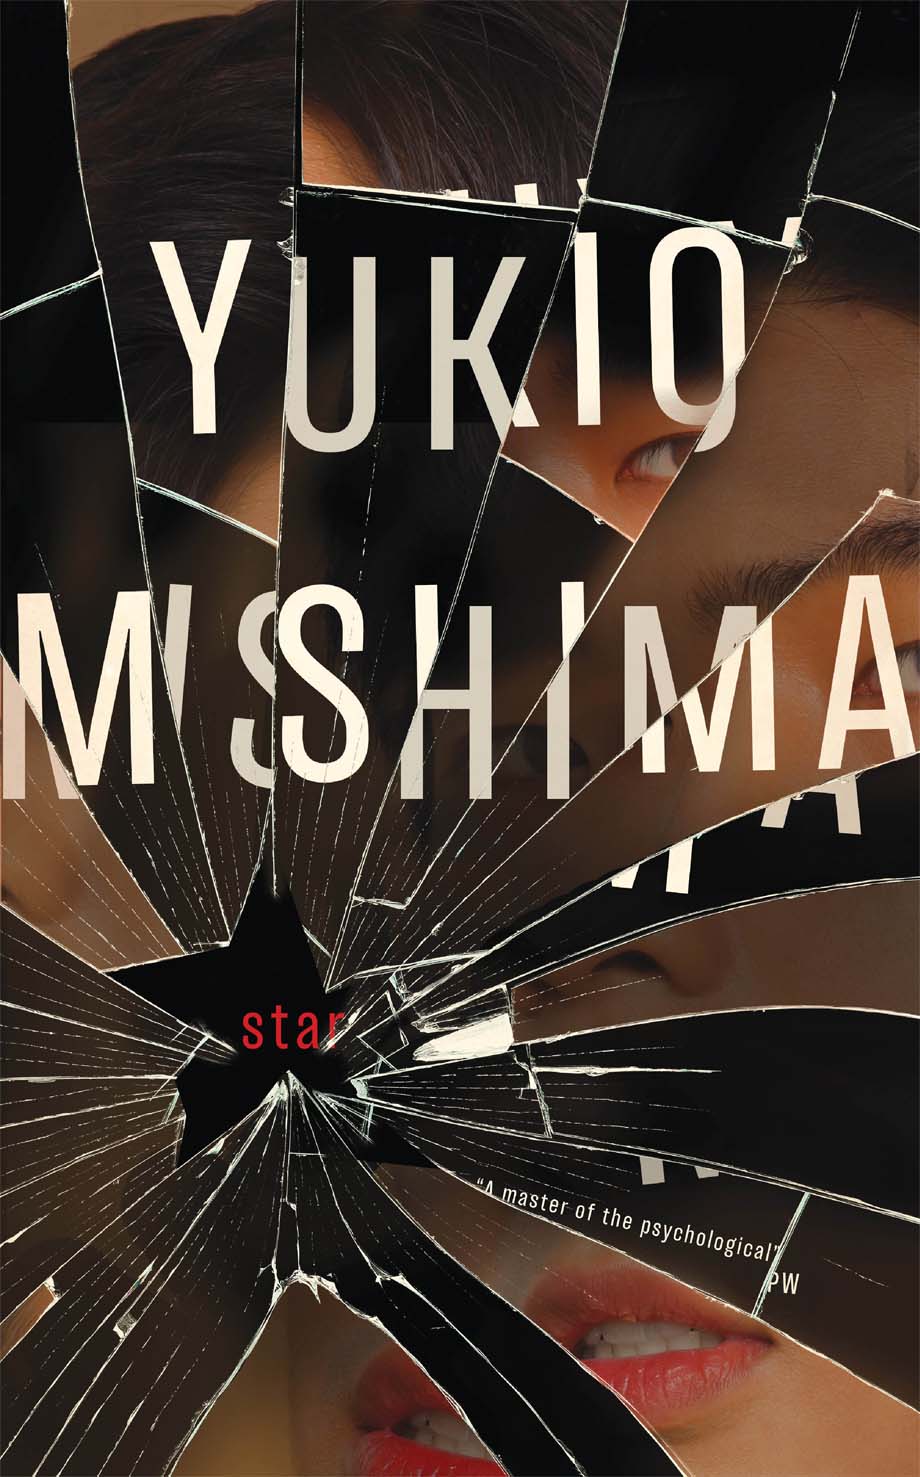 Star also by yukio mishima from New Directions Confessions of a Mask - photo 1